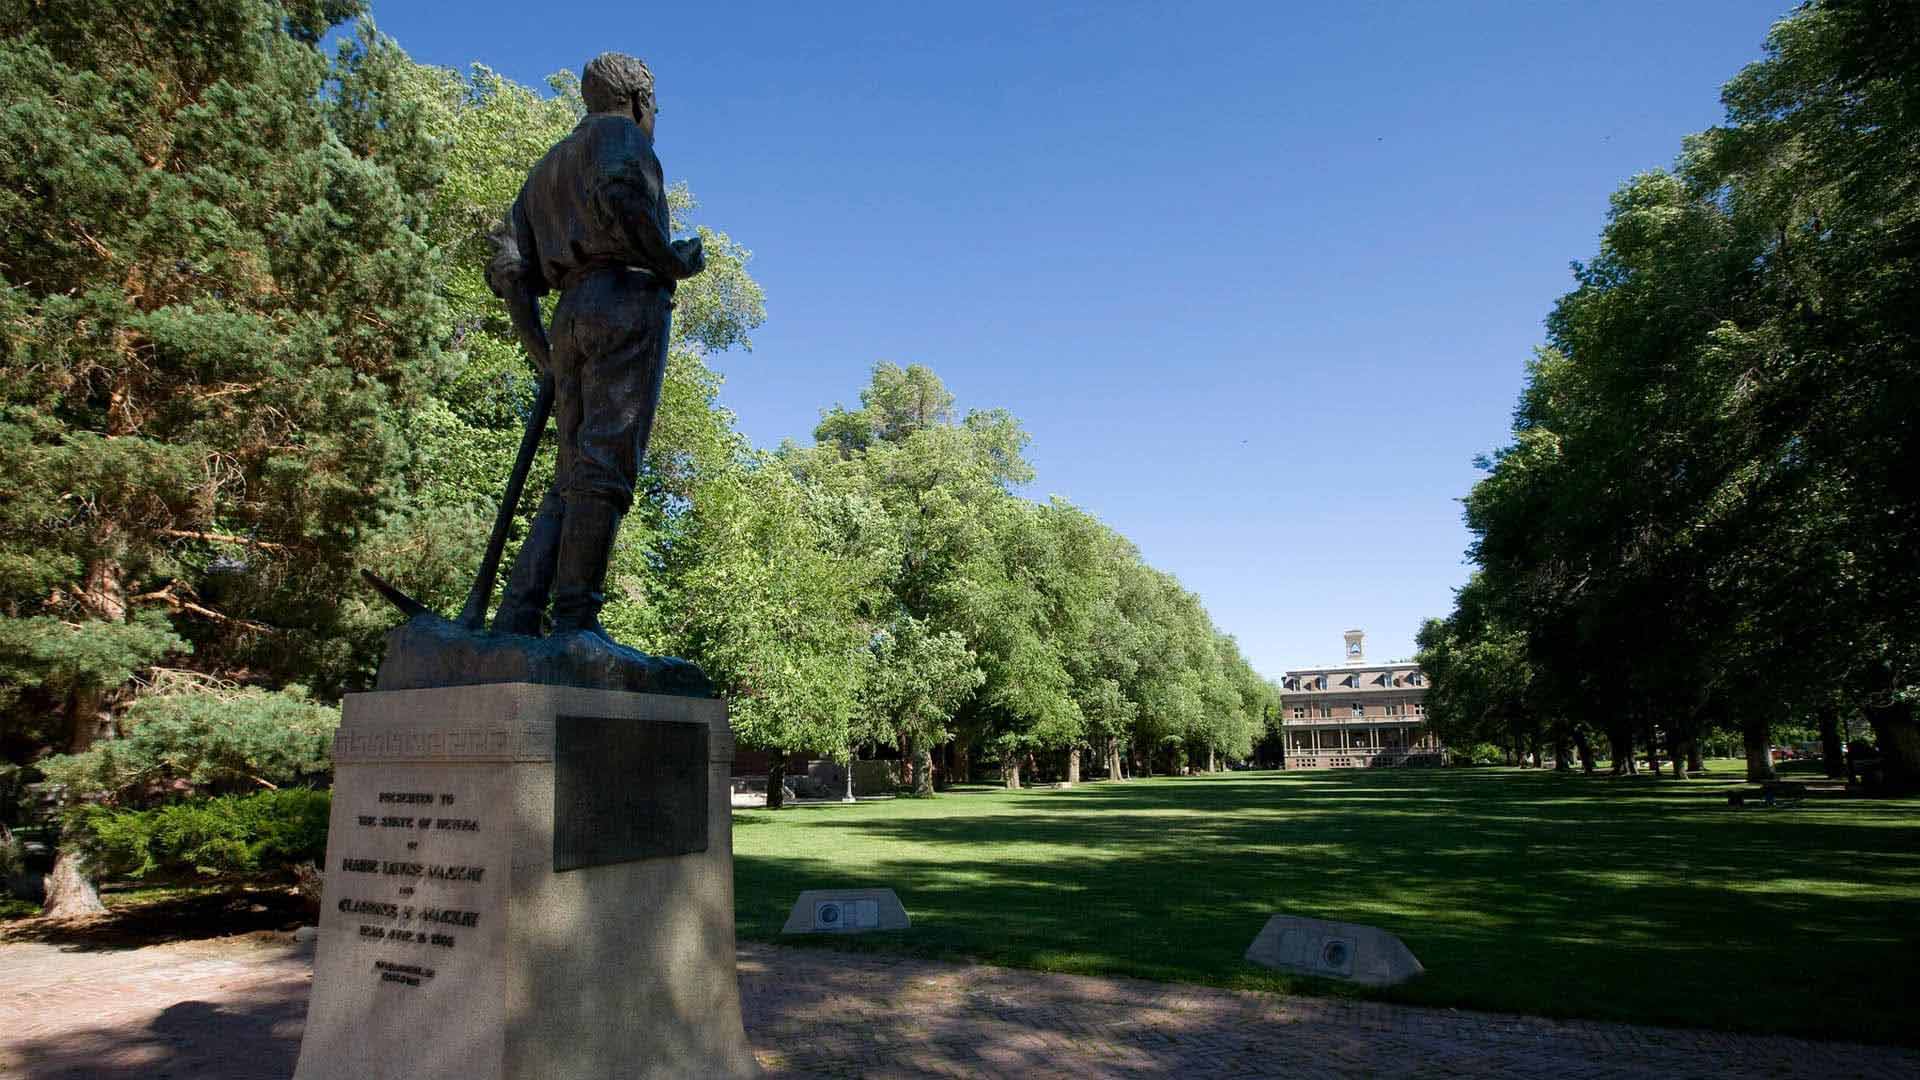 The John Mackay statue stands at the north end of the University of Nevada, Reno Quad -- a large lawn area surrounded by trees and an outer ring of buildings -- with Morrill Hall visible at the opposite end of the statue.